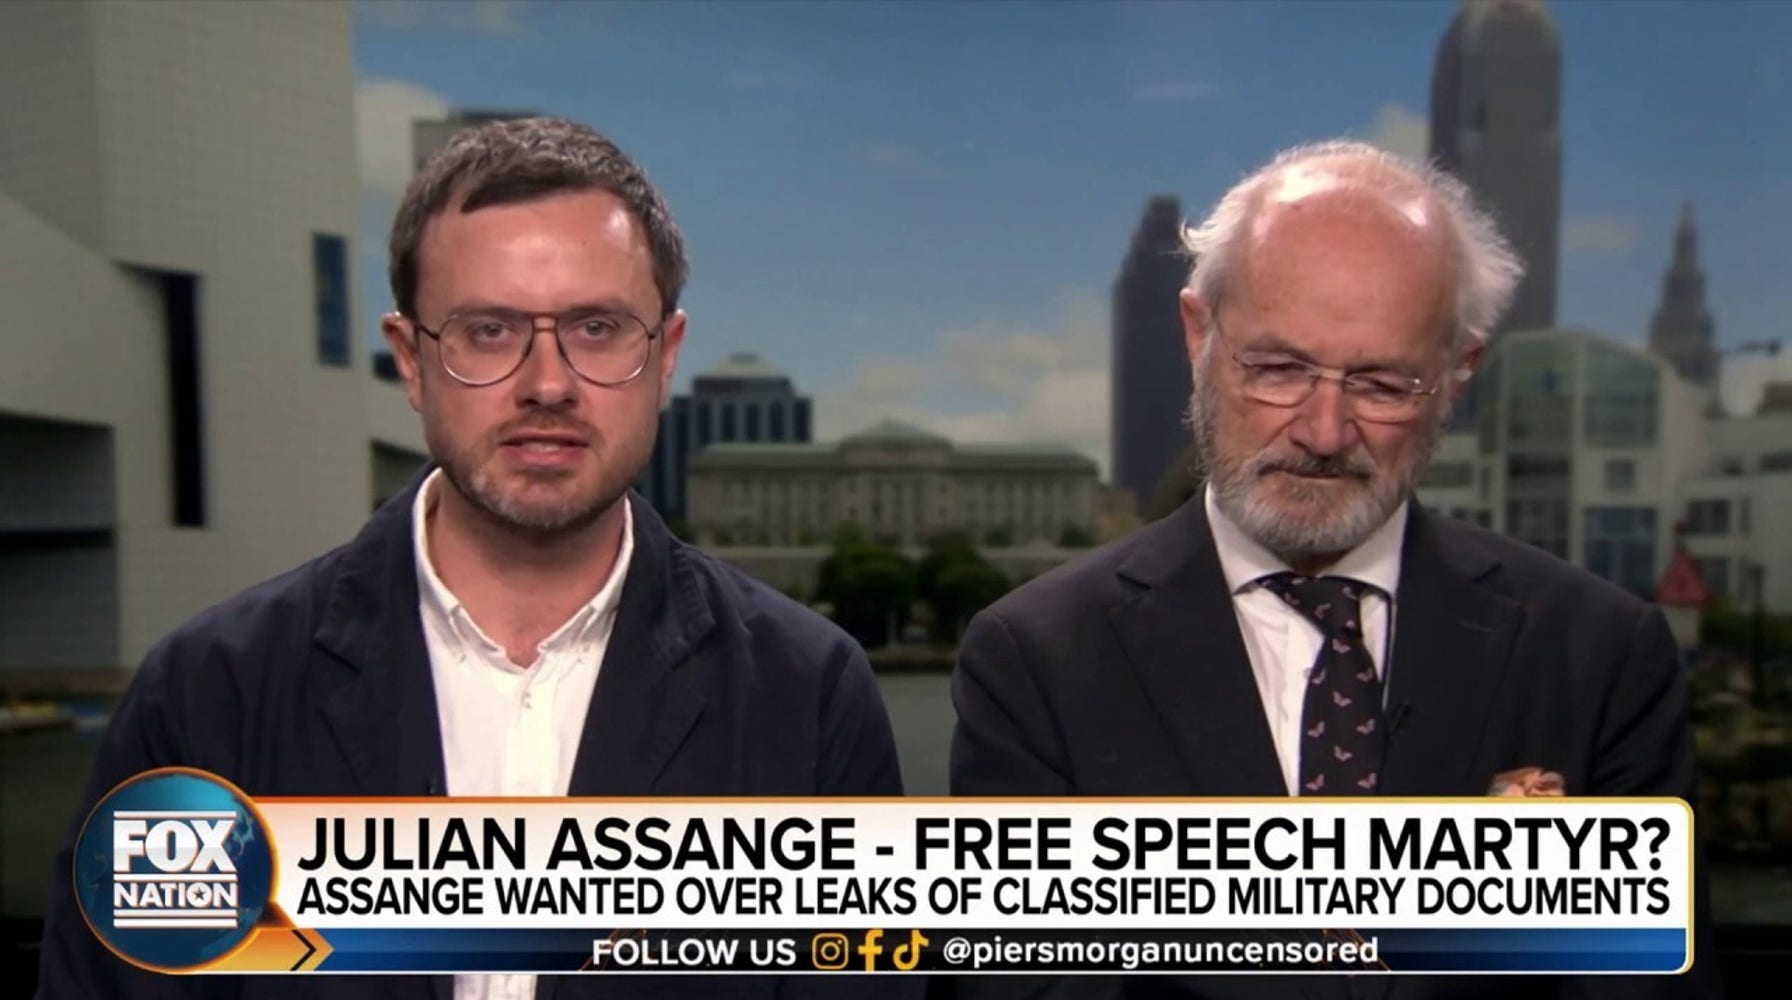 Julian Assange: A Complex Legacy of Press Freedom and National Security